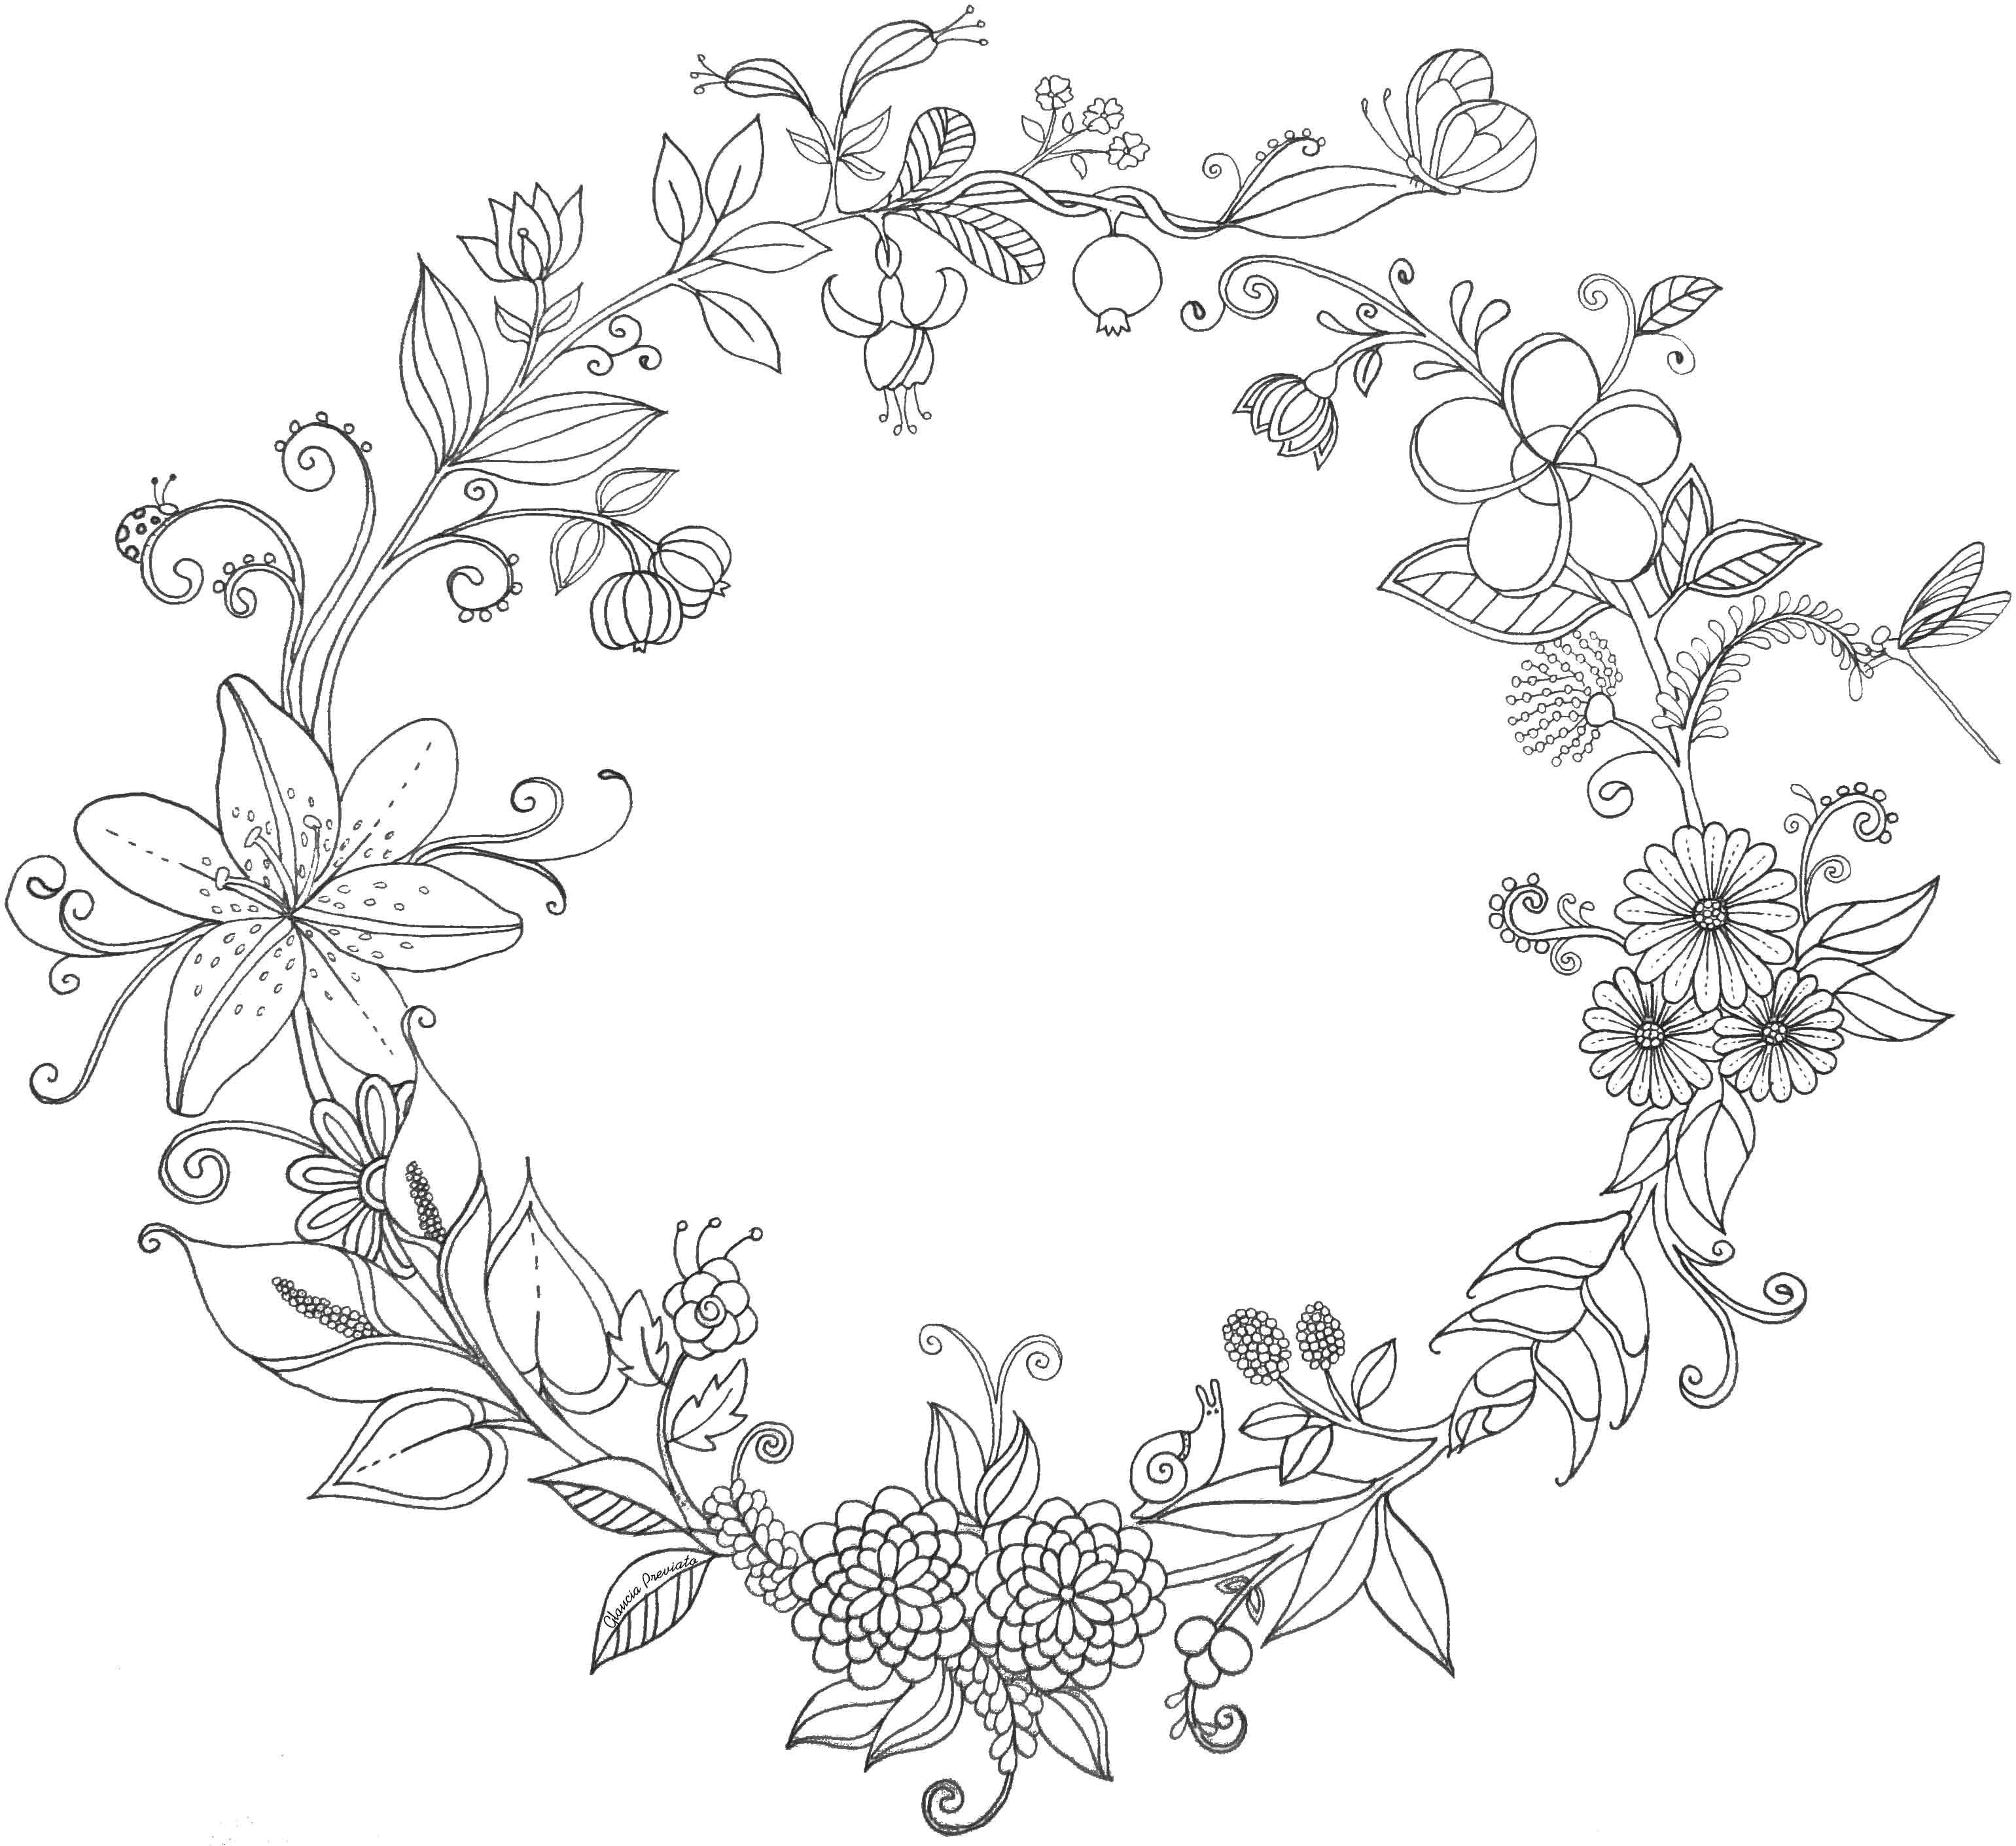 Drawing Embroidery Flowers Ilustraa A O Flores Do Brasil Illustration Flowers Brazil Glaucia